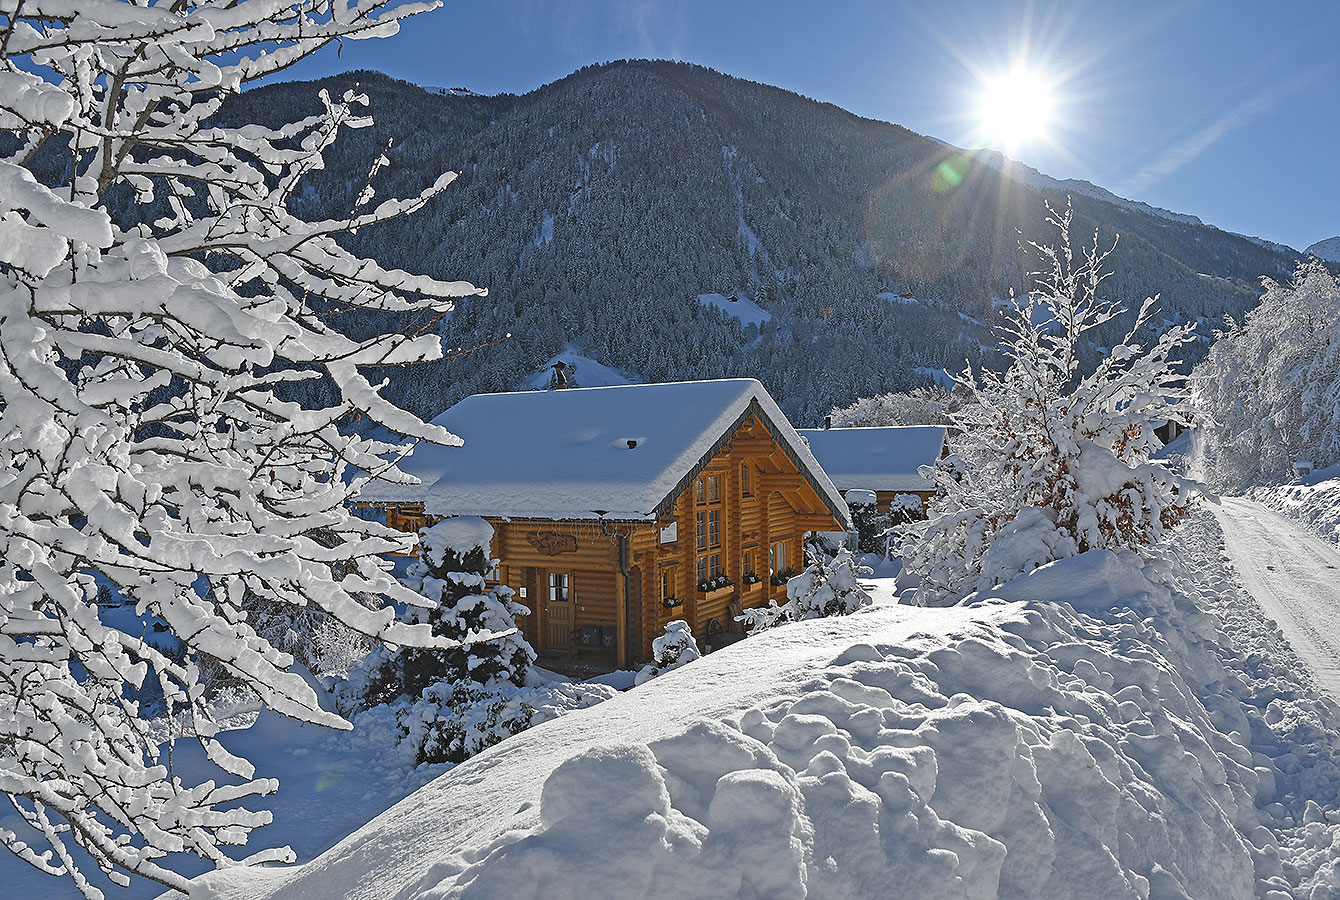 Skiing in Nendaz: Why You Should Stay in a Luxury Alpine Comfort Chalet